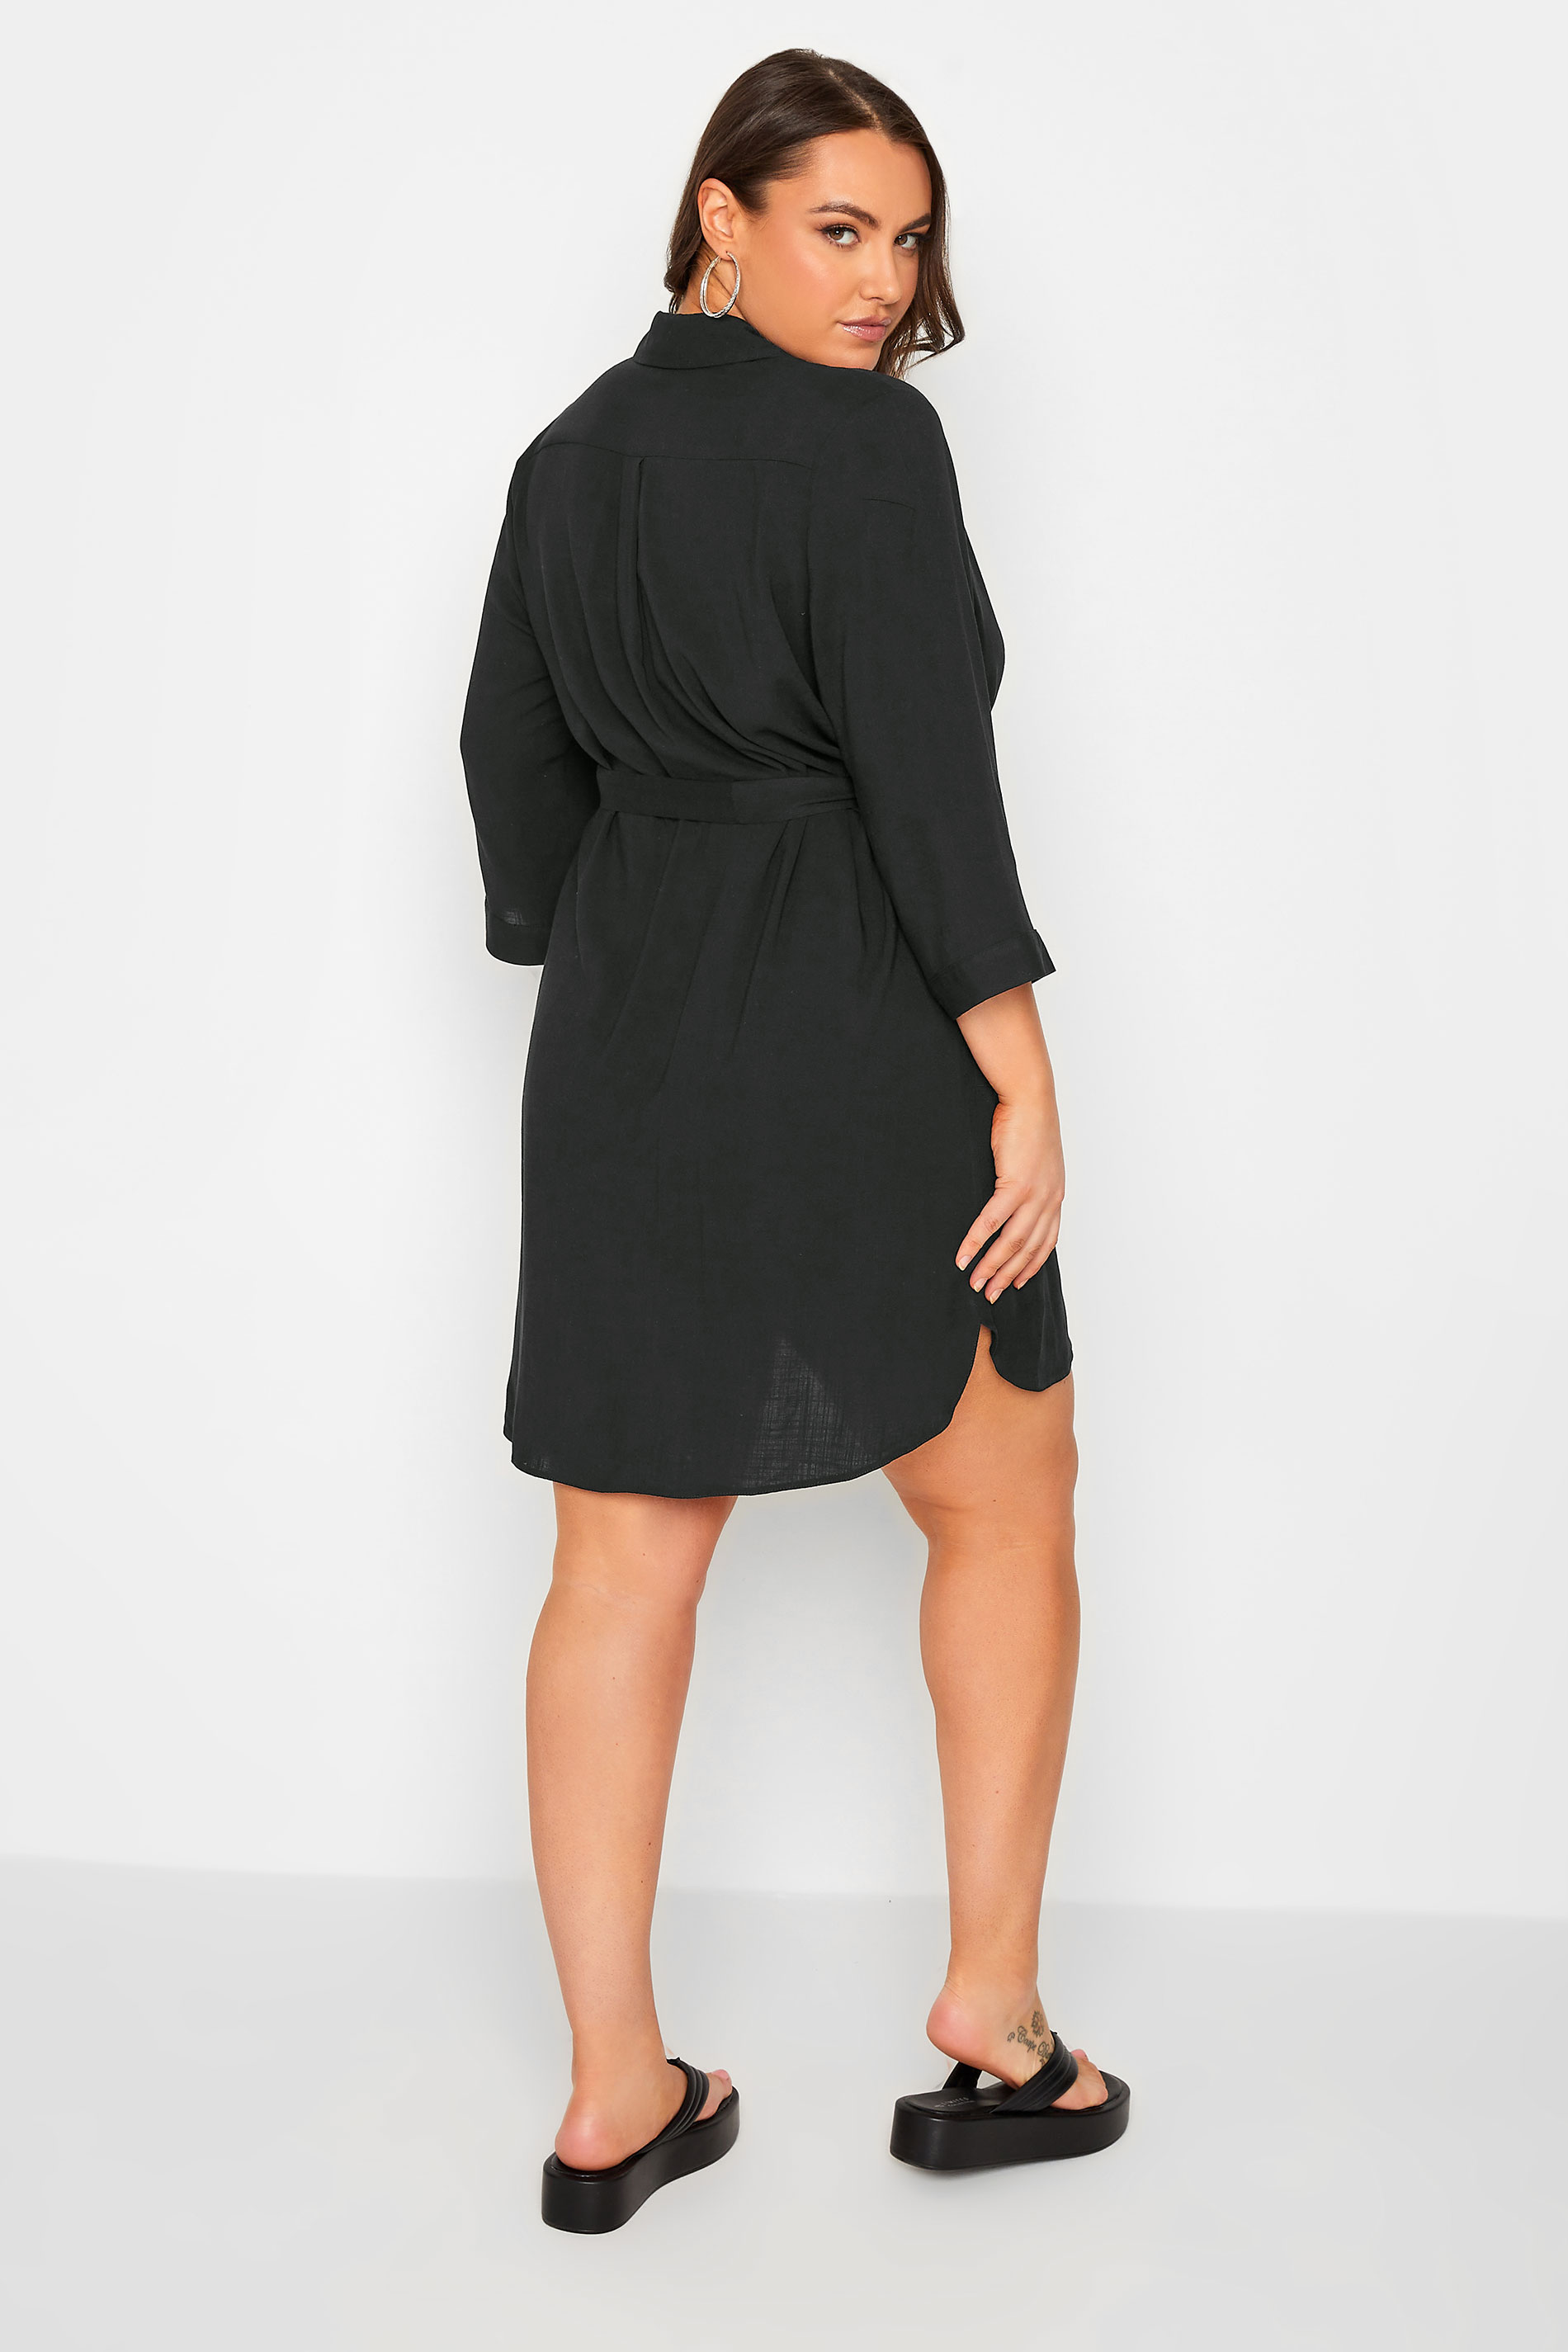 YOURS Plus Size Black Tie Waist Tunic Shirt | Yours Clothing 3